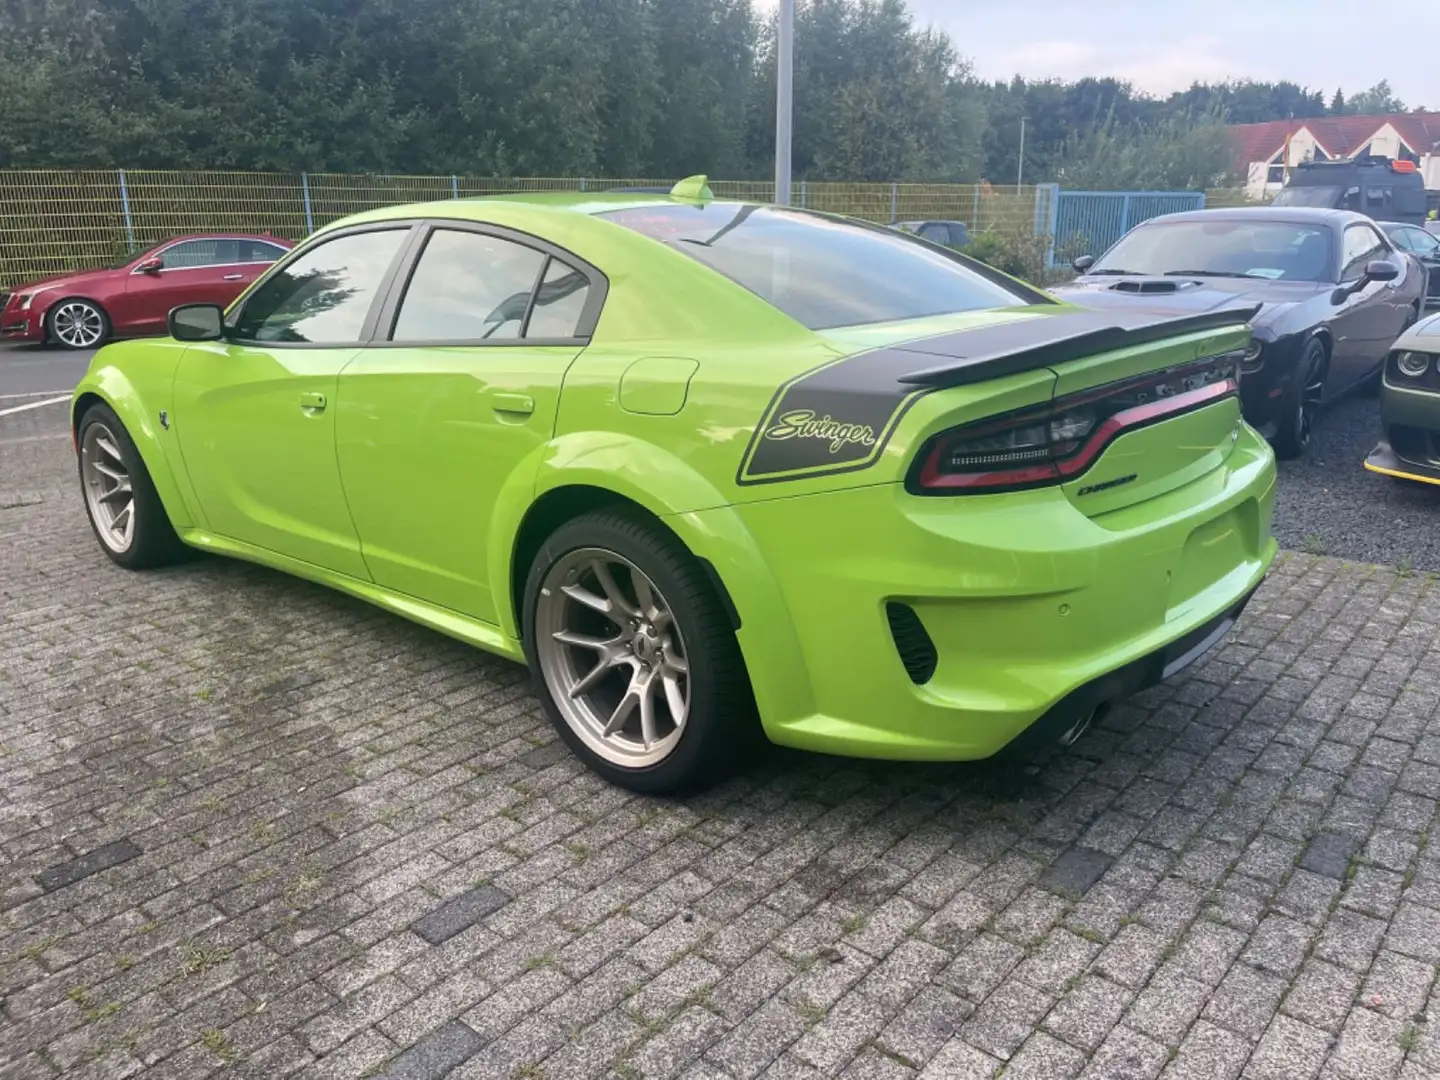 Dodge Charger Widebody *SWINGER EDITION* Green - 2